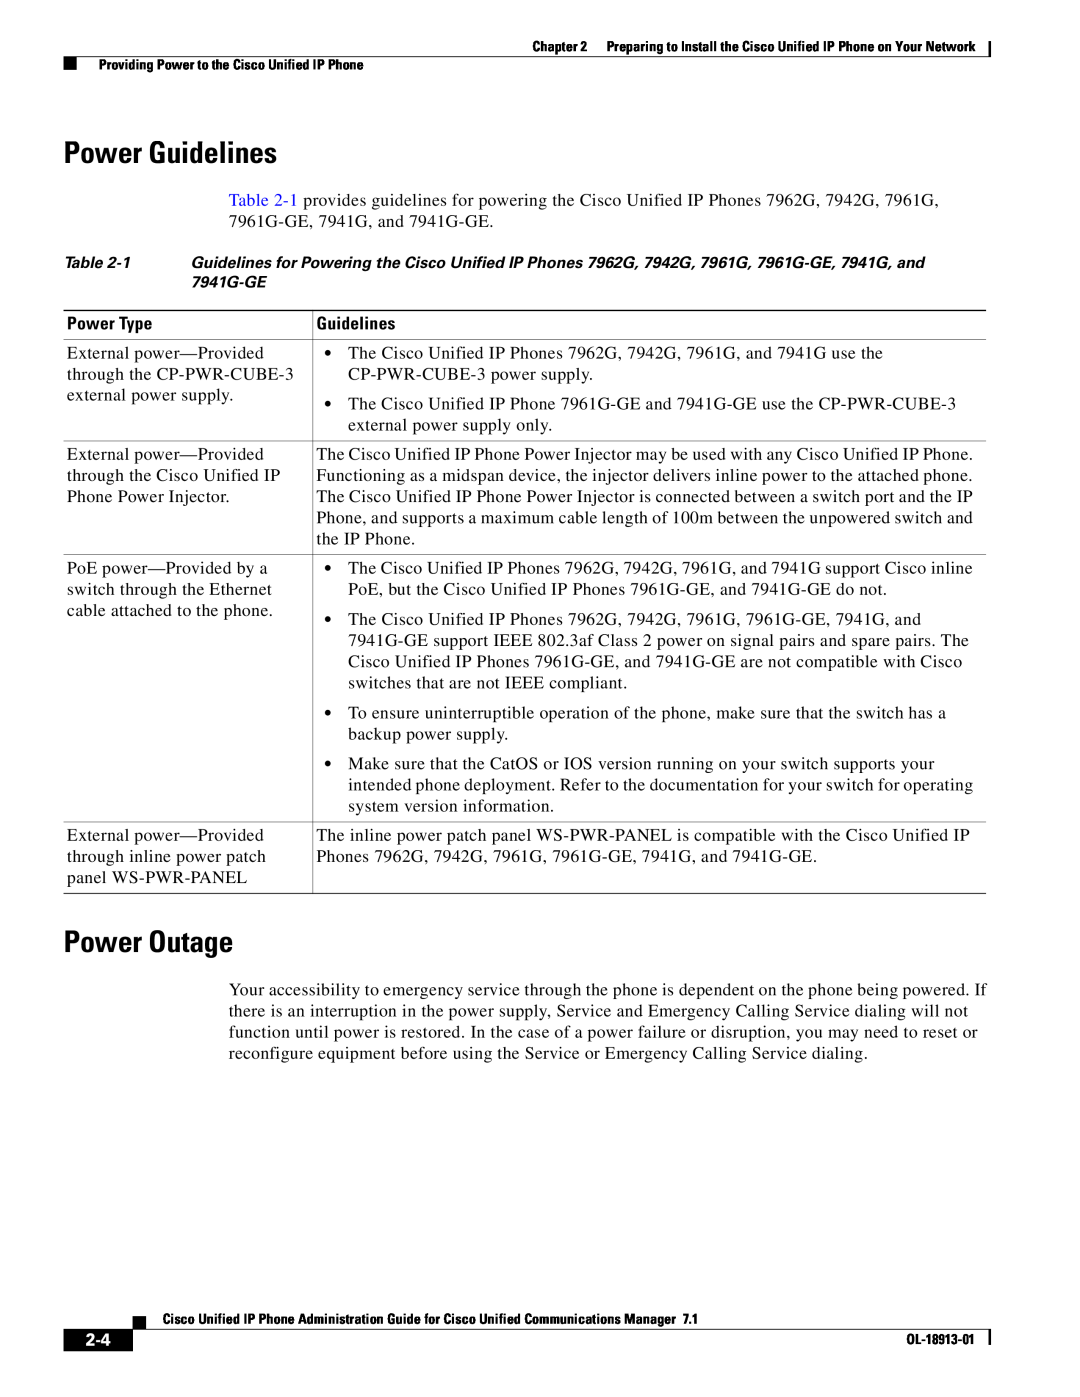 Cisco Systems 71 manual Power Guidelines, Power Outage, Power Type 